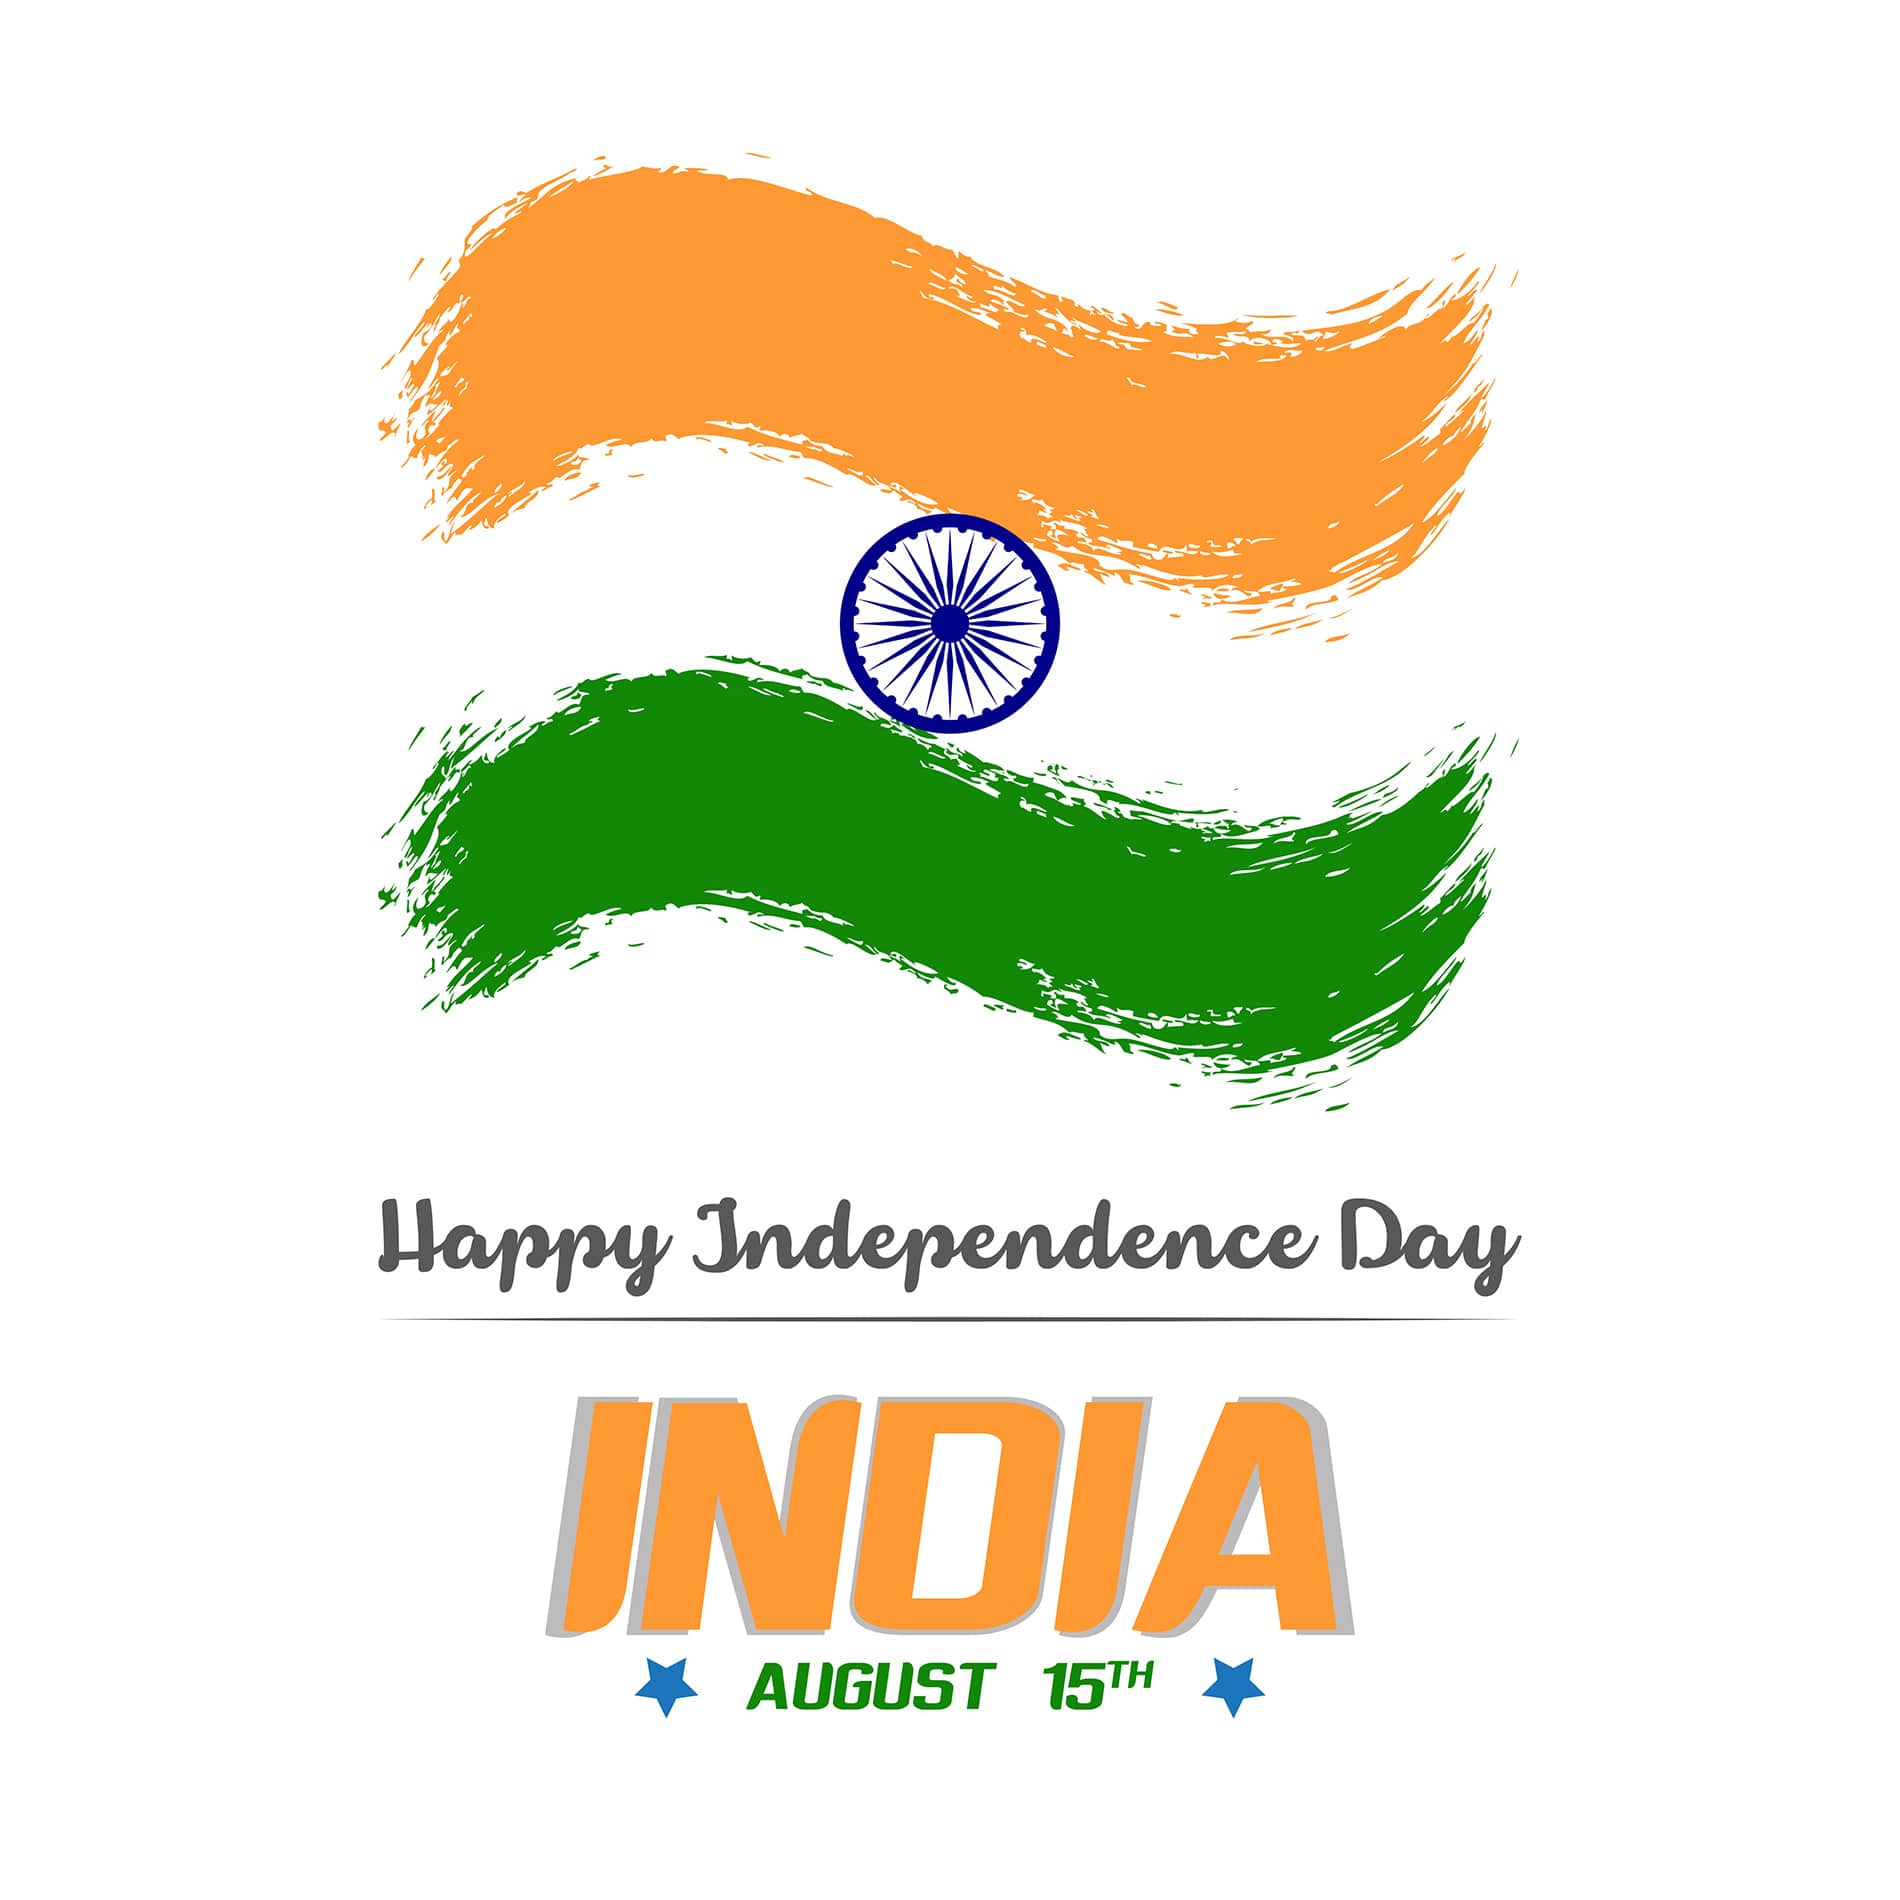 Creative independence day vector template for India with waving abstract flag design